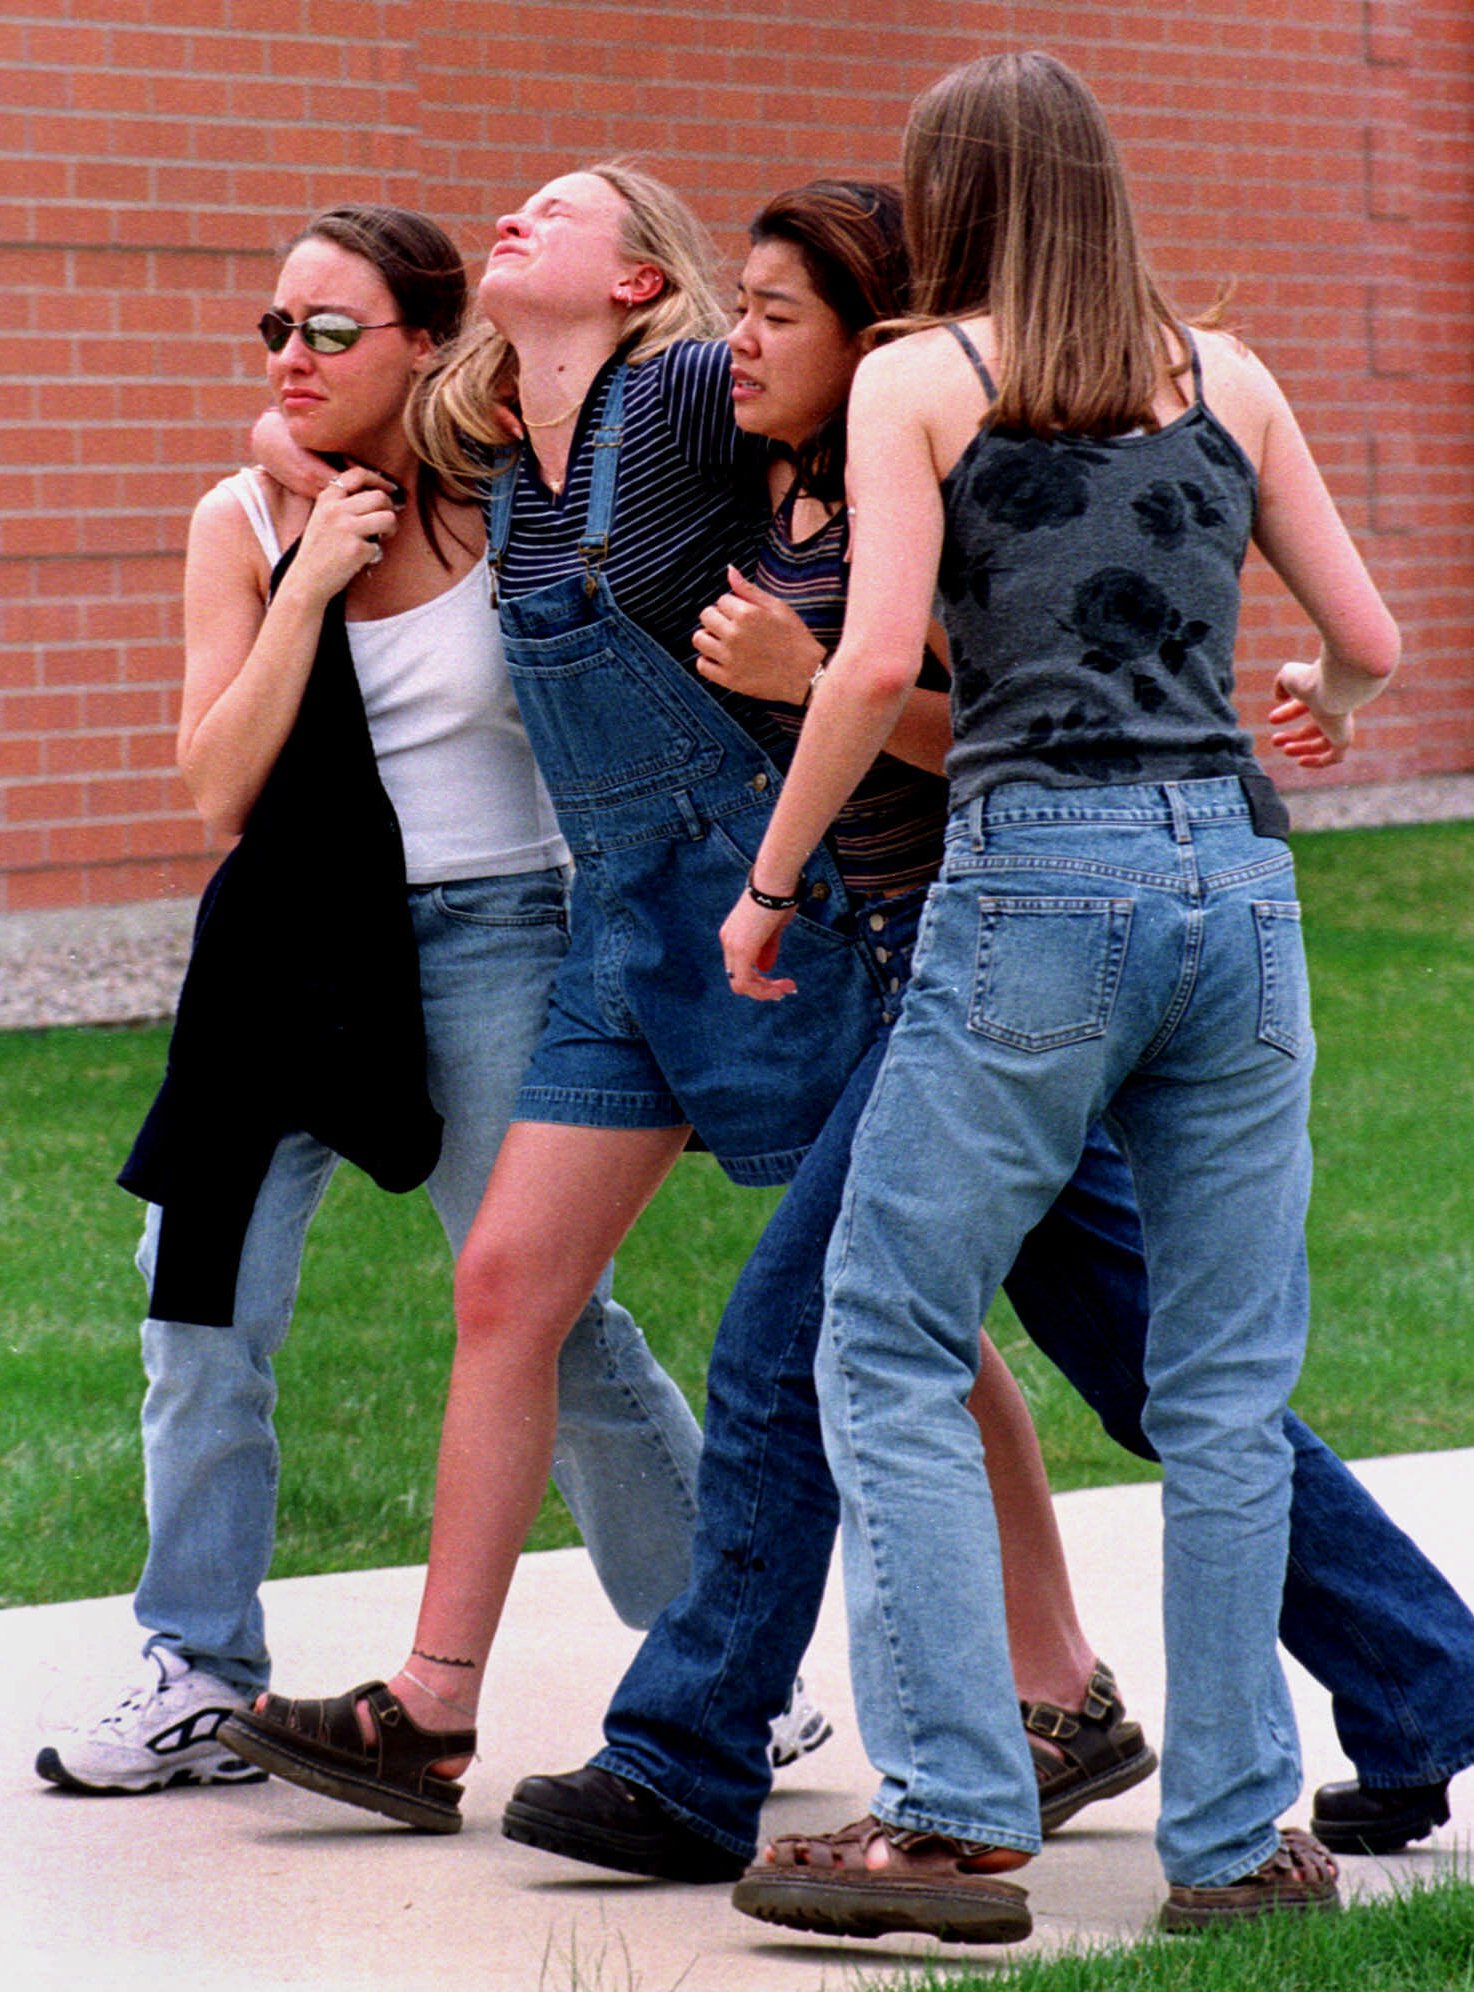 PHOTO: Young women head to a location near Columbine High School where students and faculty members were evacuated after two gunmen went on a shooting rampage in the school in the southwest Denver suburb of Littleton, Colo., April 20, 1999.